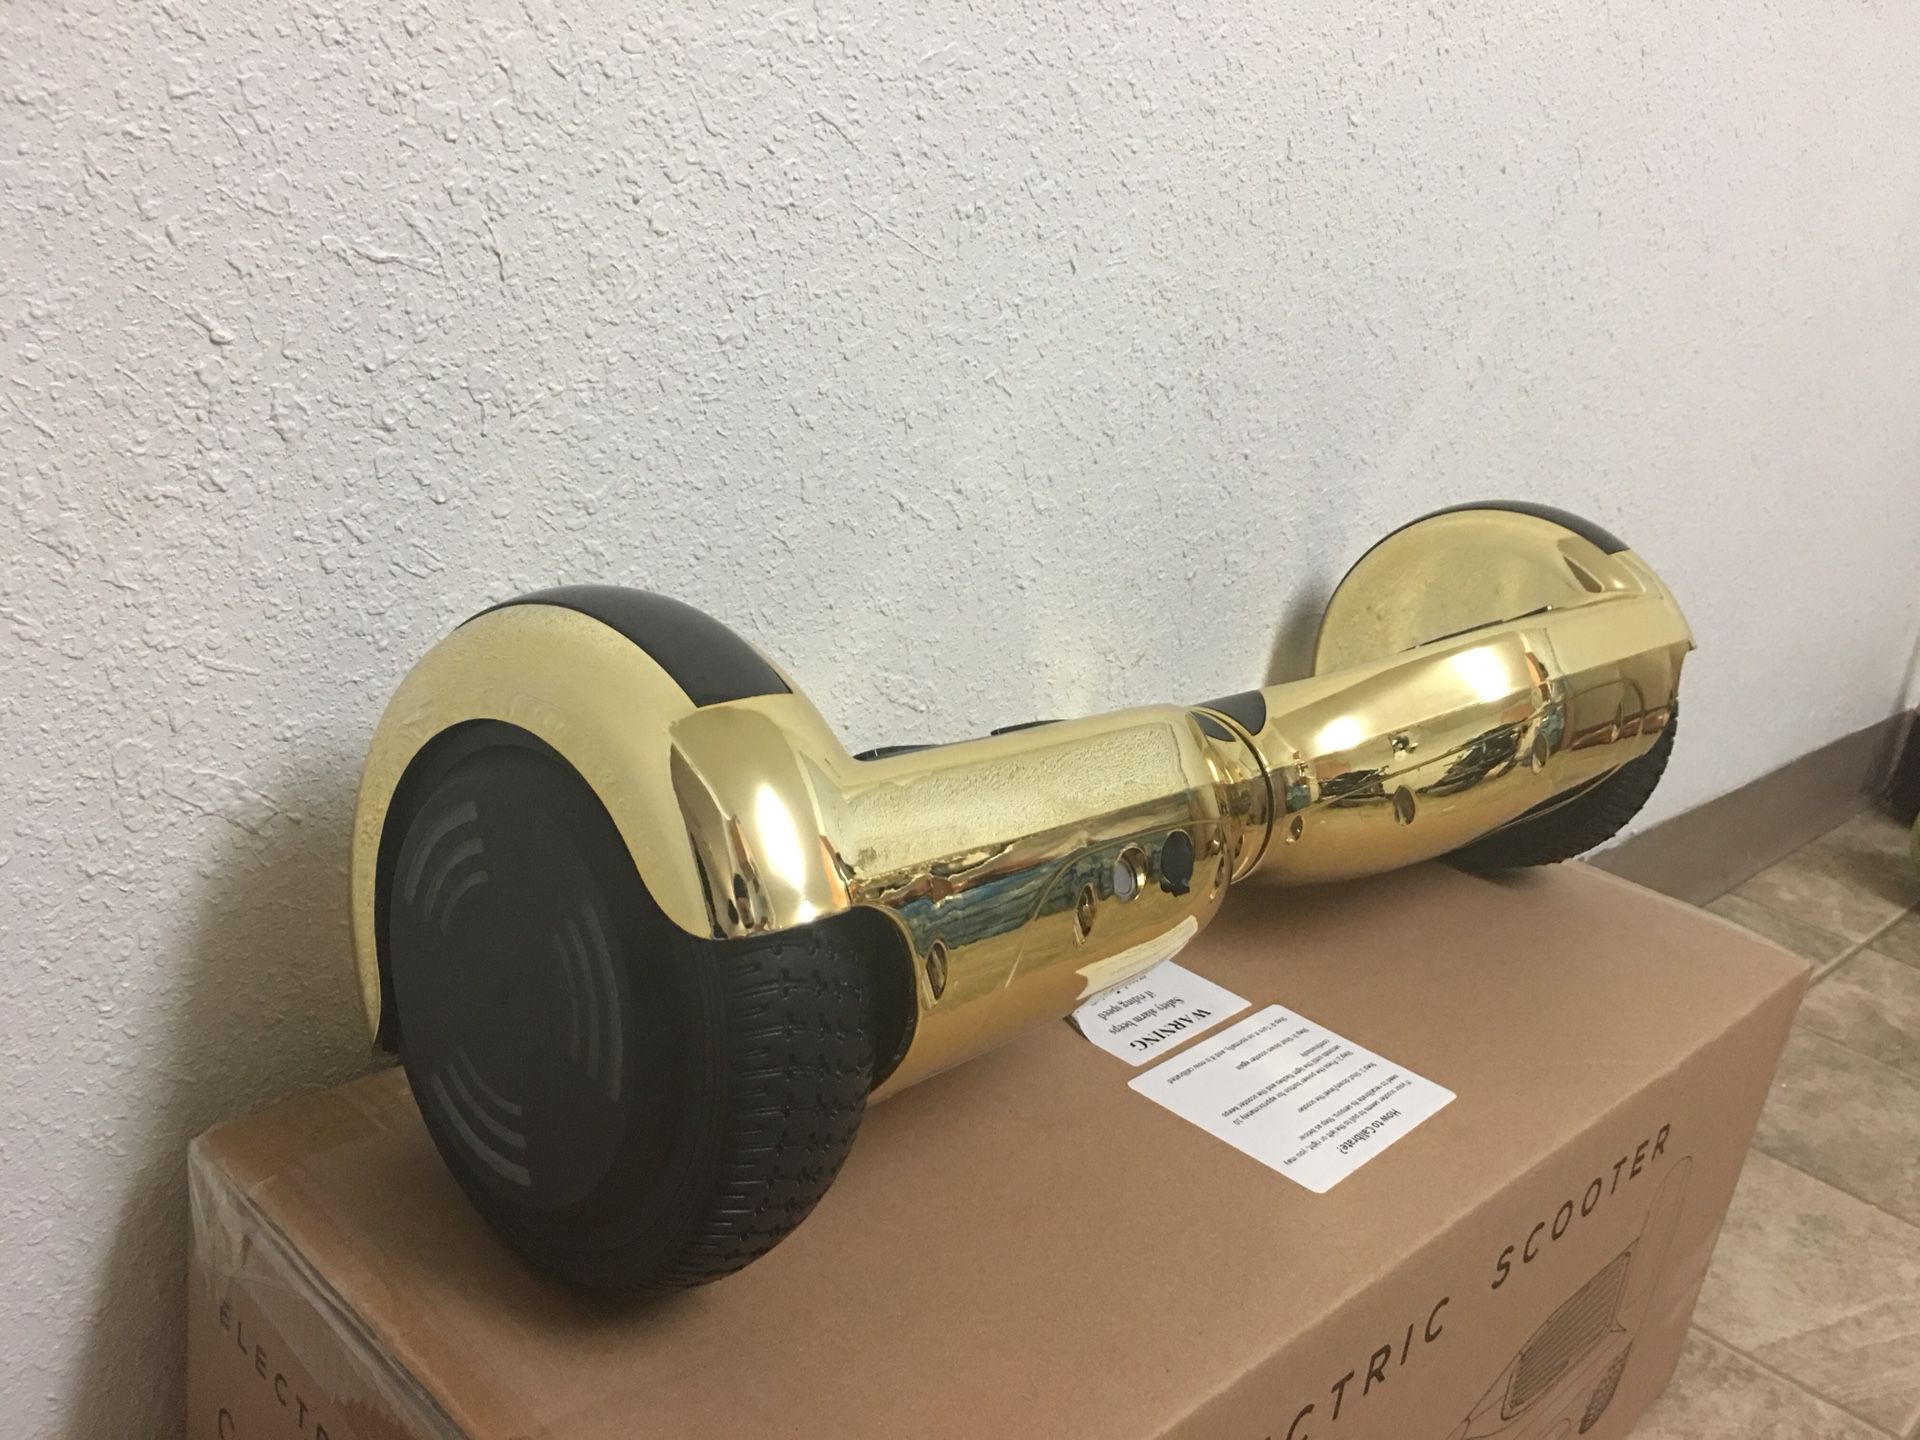 Brand new gold metallic hoverboard ( has Bluetooth to play music)